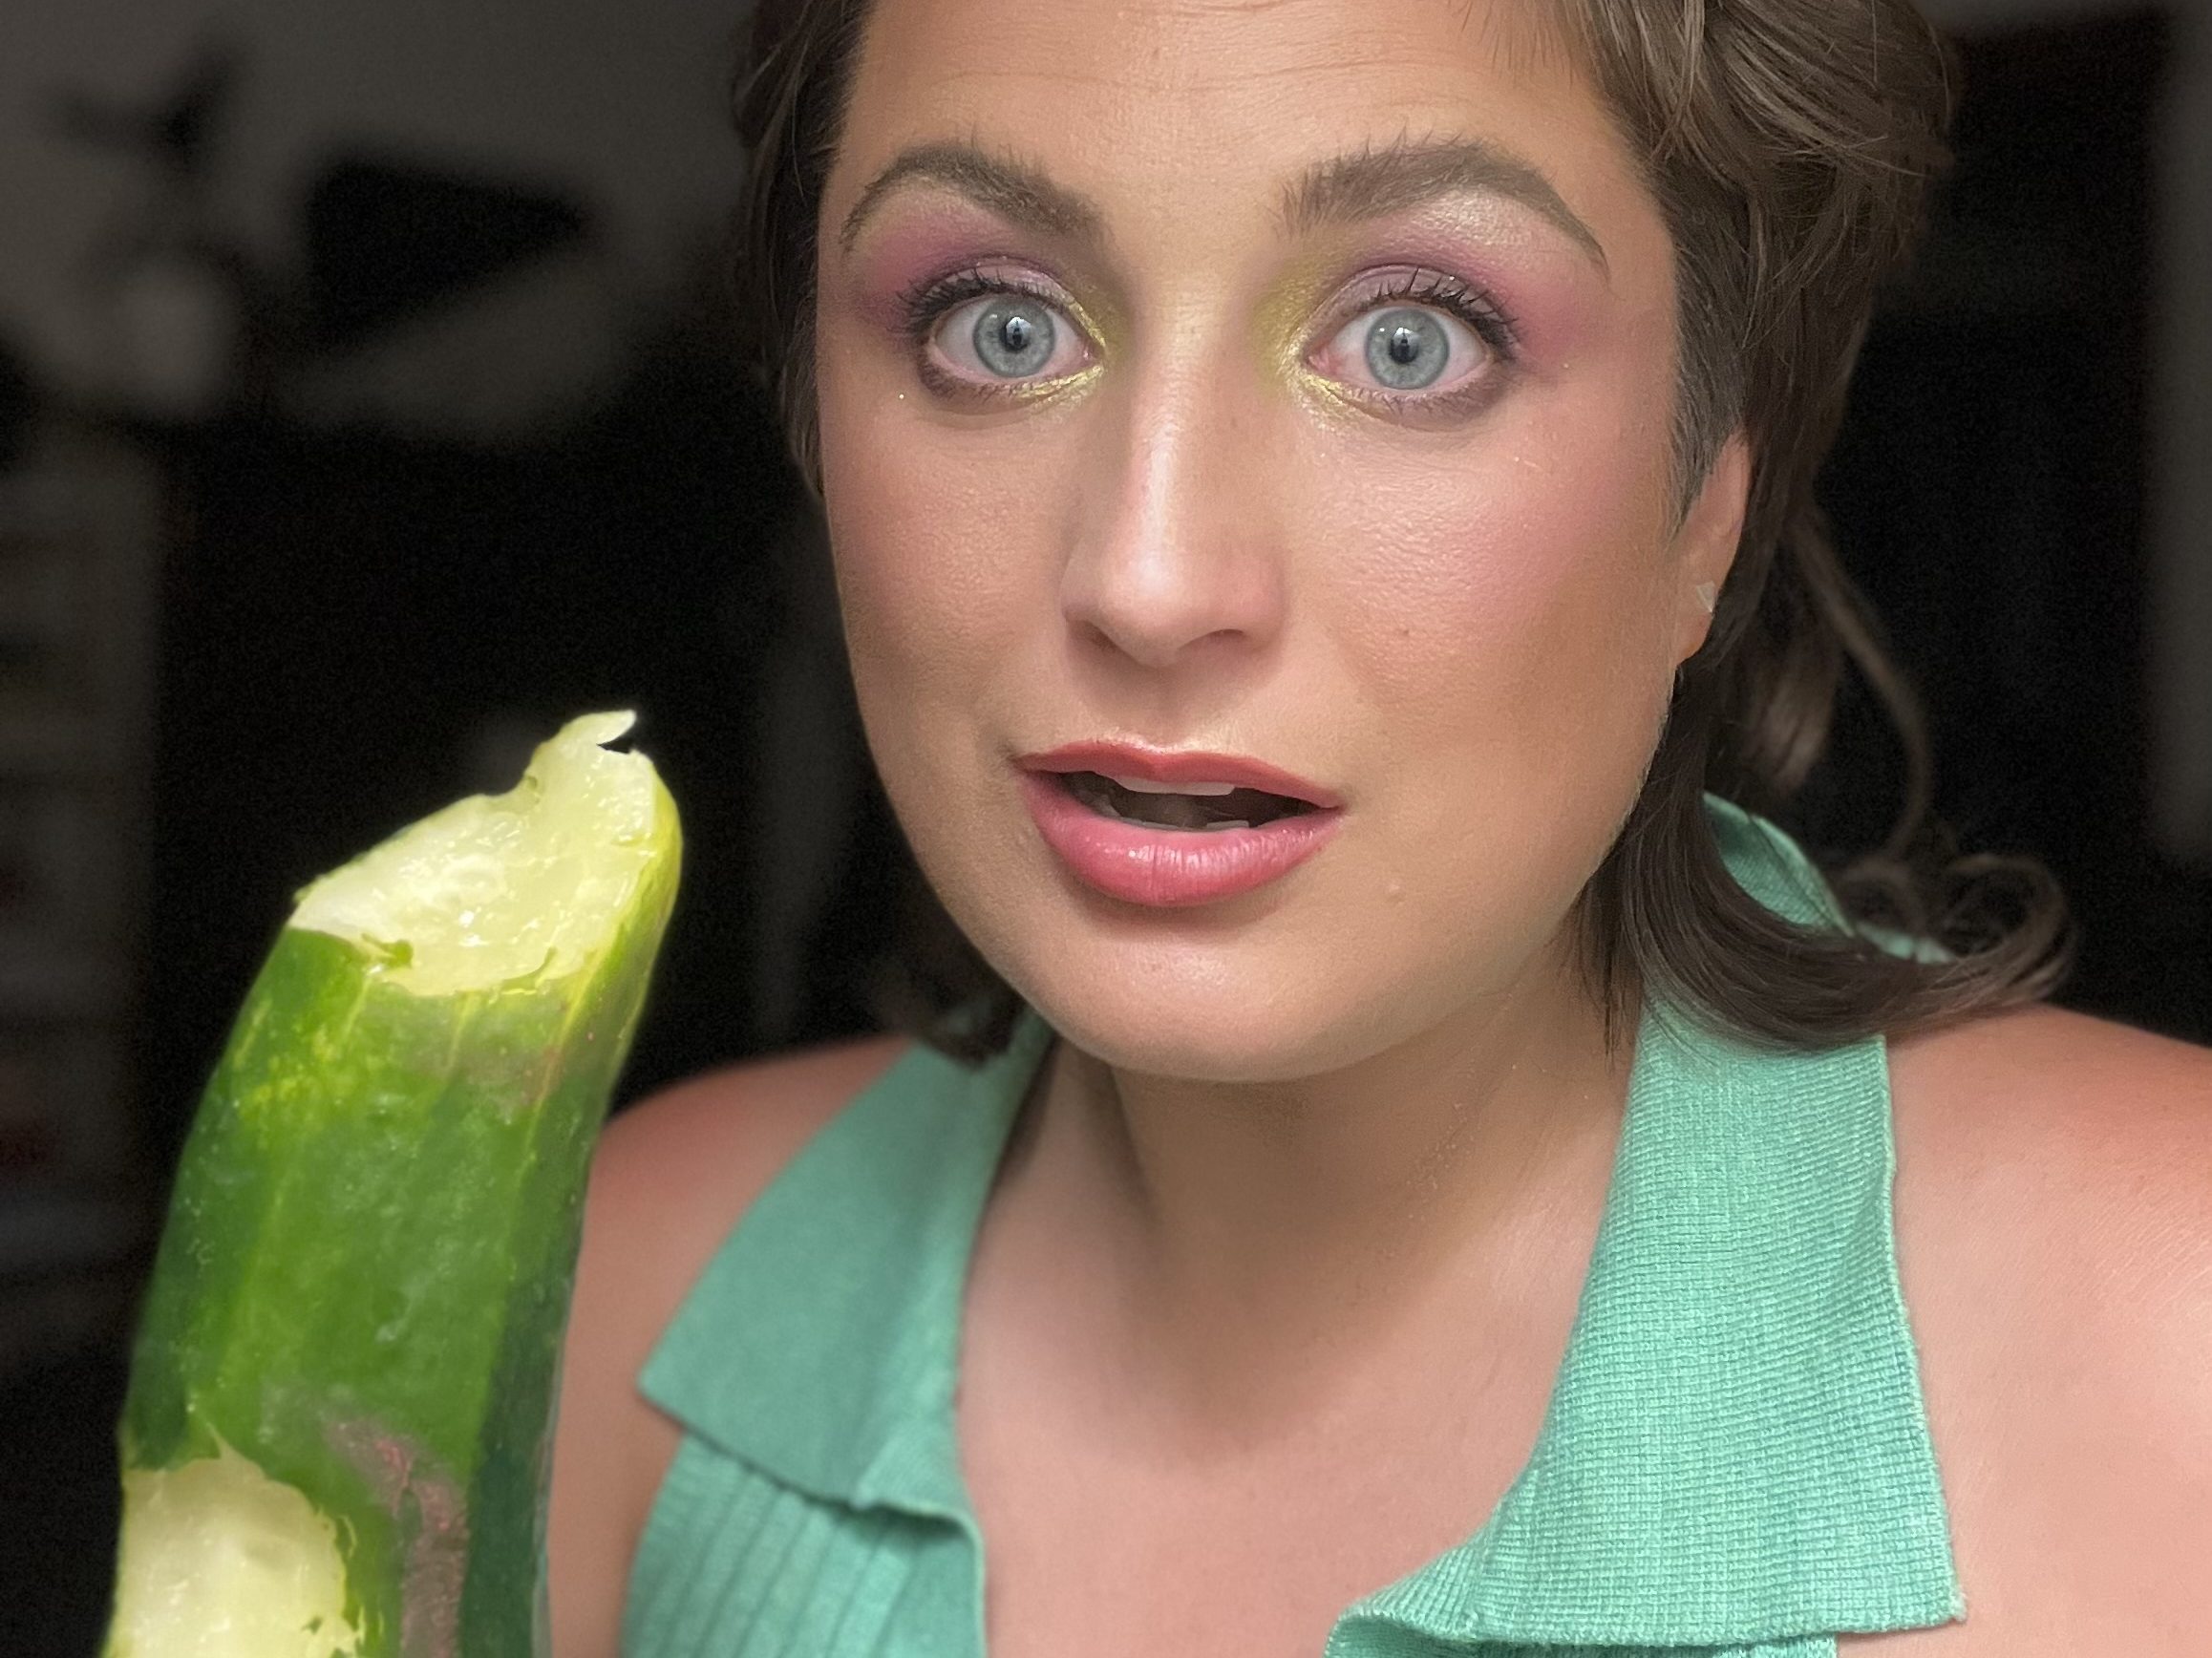 Liz Butler poses with a munched on cucumber.